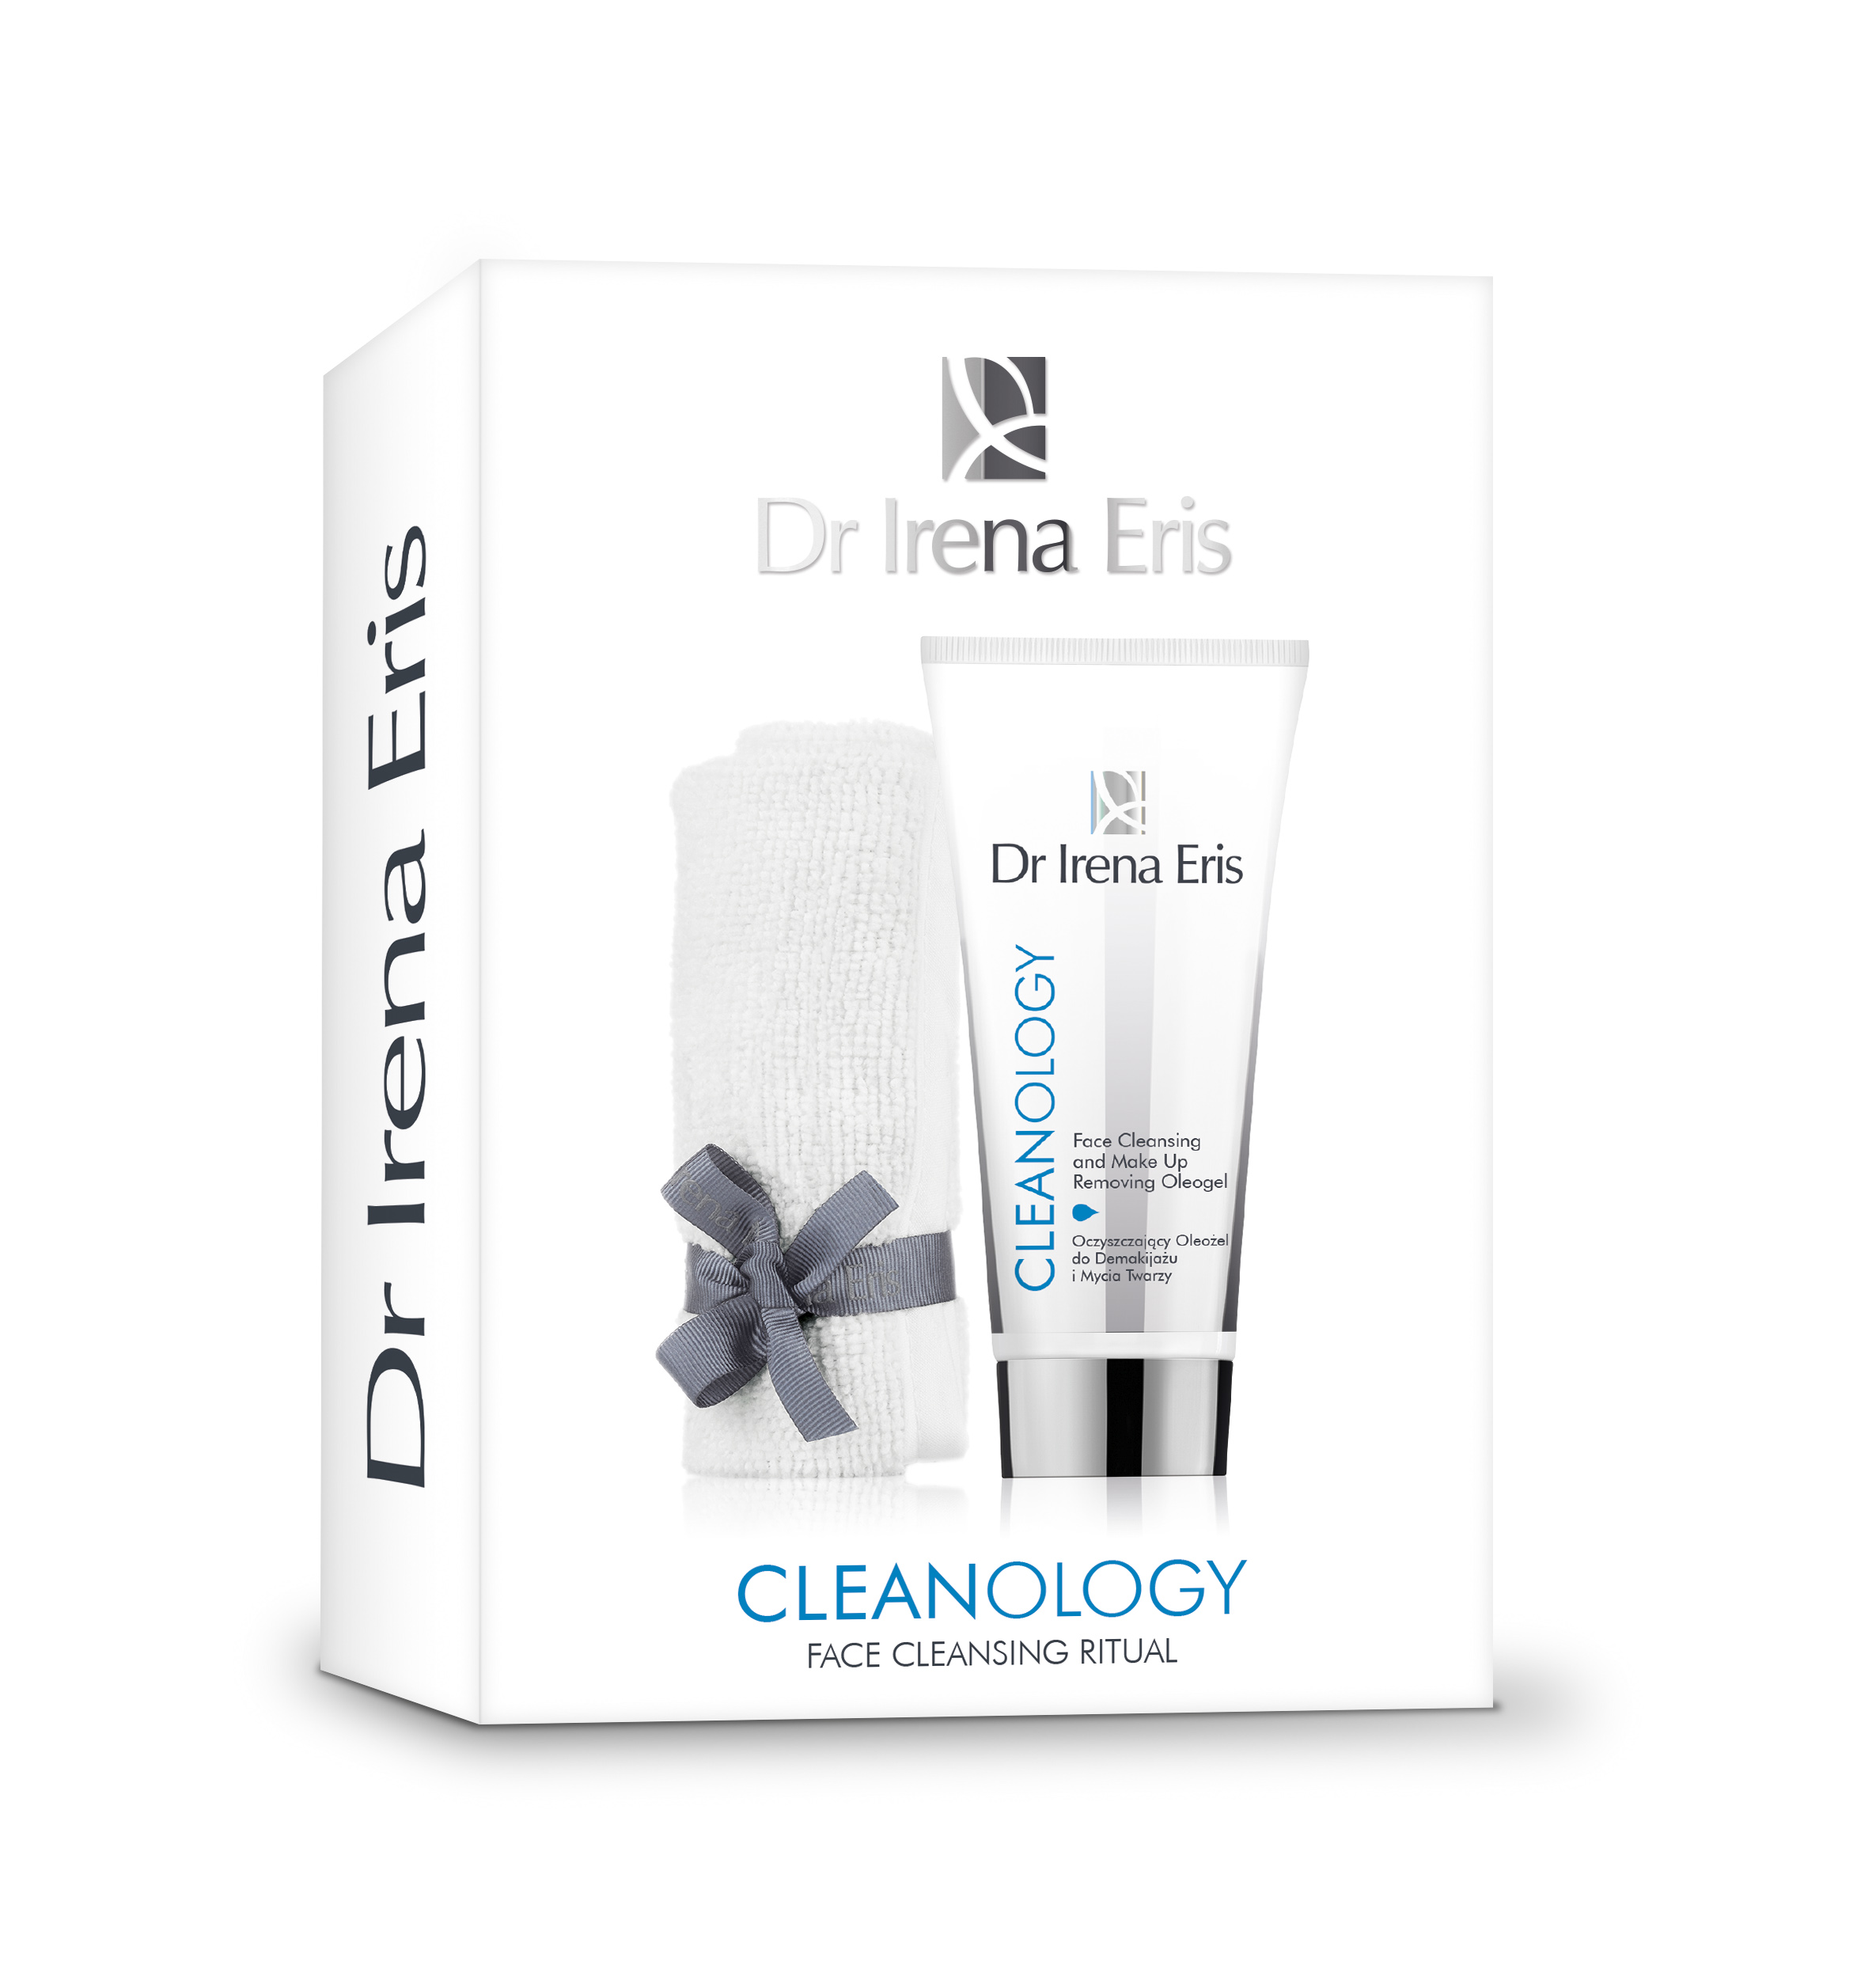  Cleanology Face Cleansing Ritual